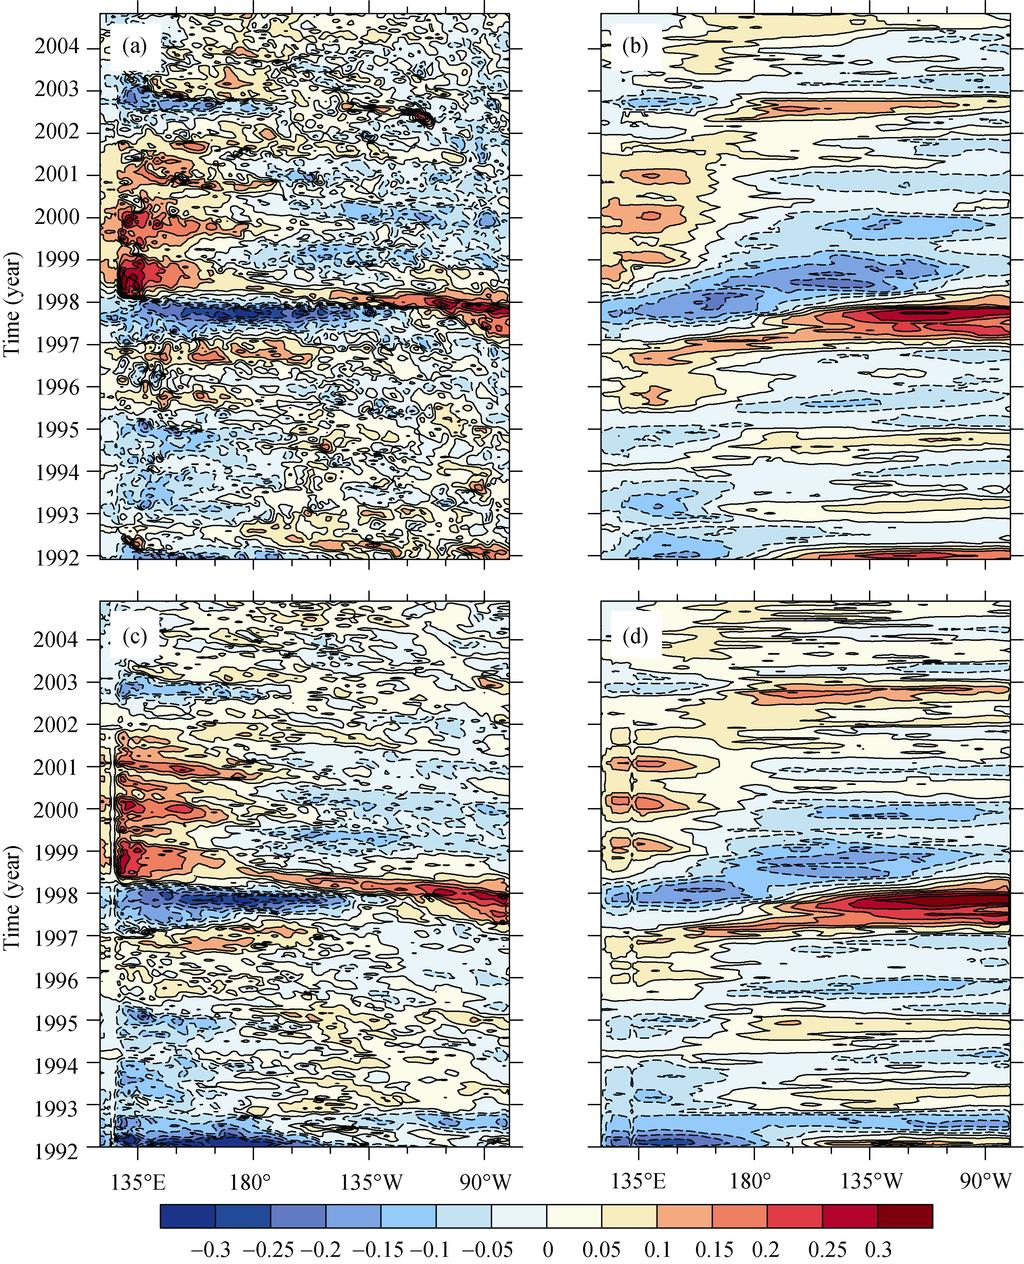 NO. 1 WANG AND ZHOU: ENSO SIGNALS IN AIPO 59 Figure 3 Hovmoller diagram of SSH anomalies (units: m) across the Pacific (a) averaged in (5 8 N) based on SODA data; (b) same as (a), but for (2 S 2 N);